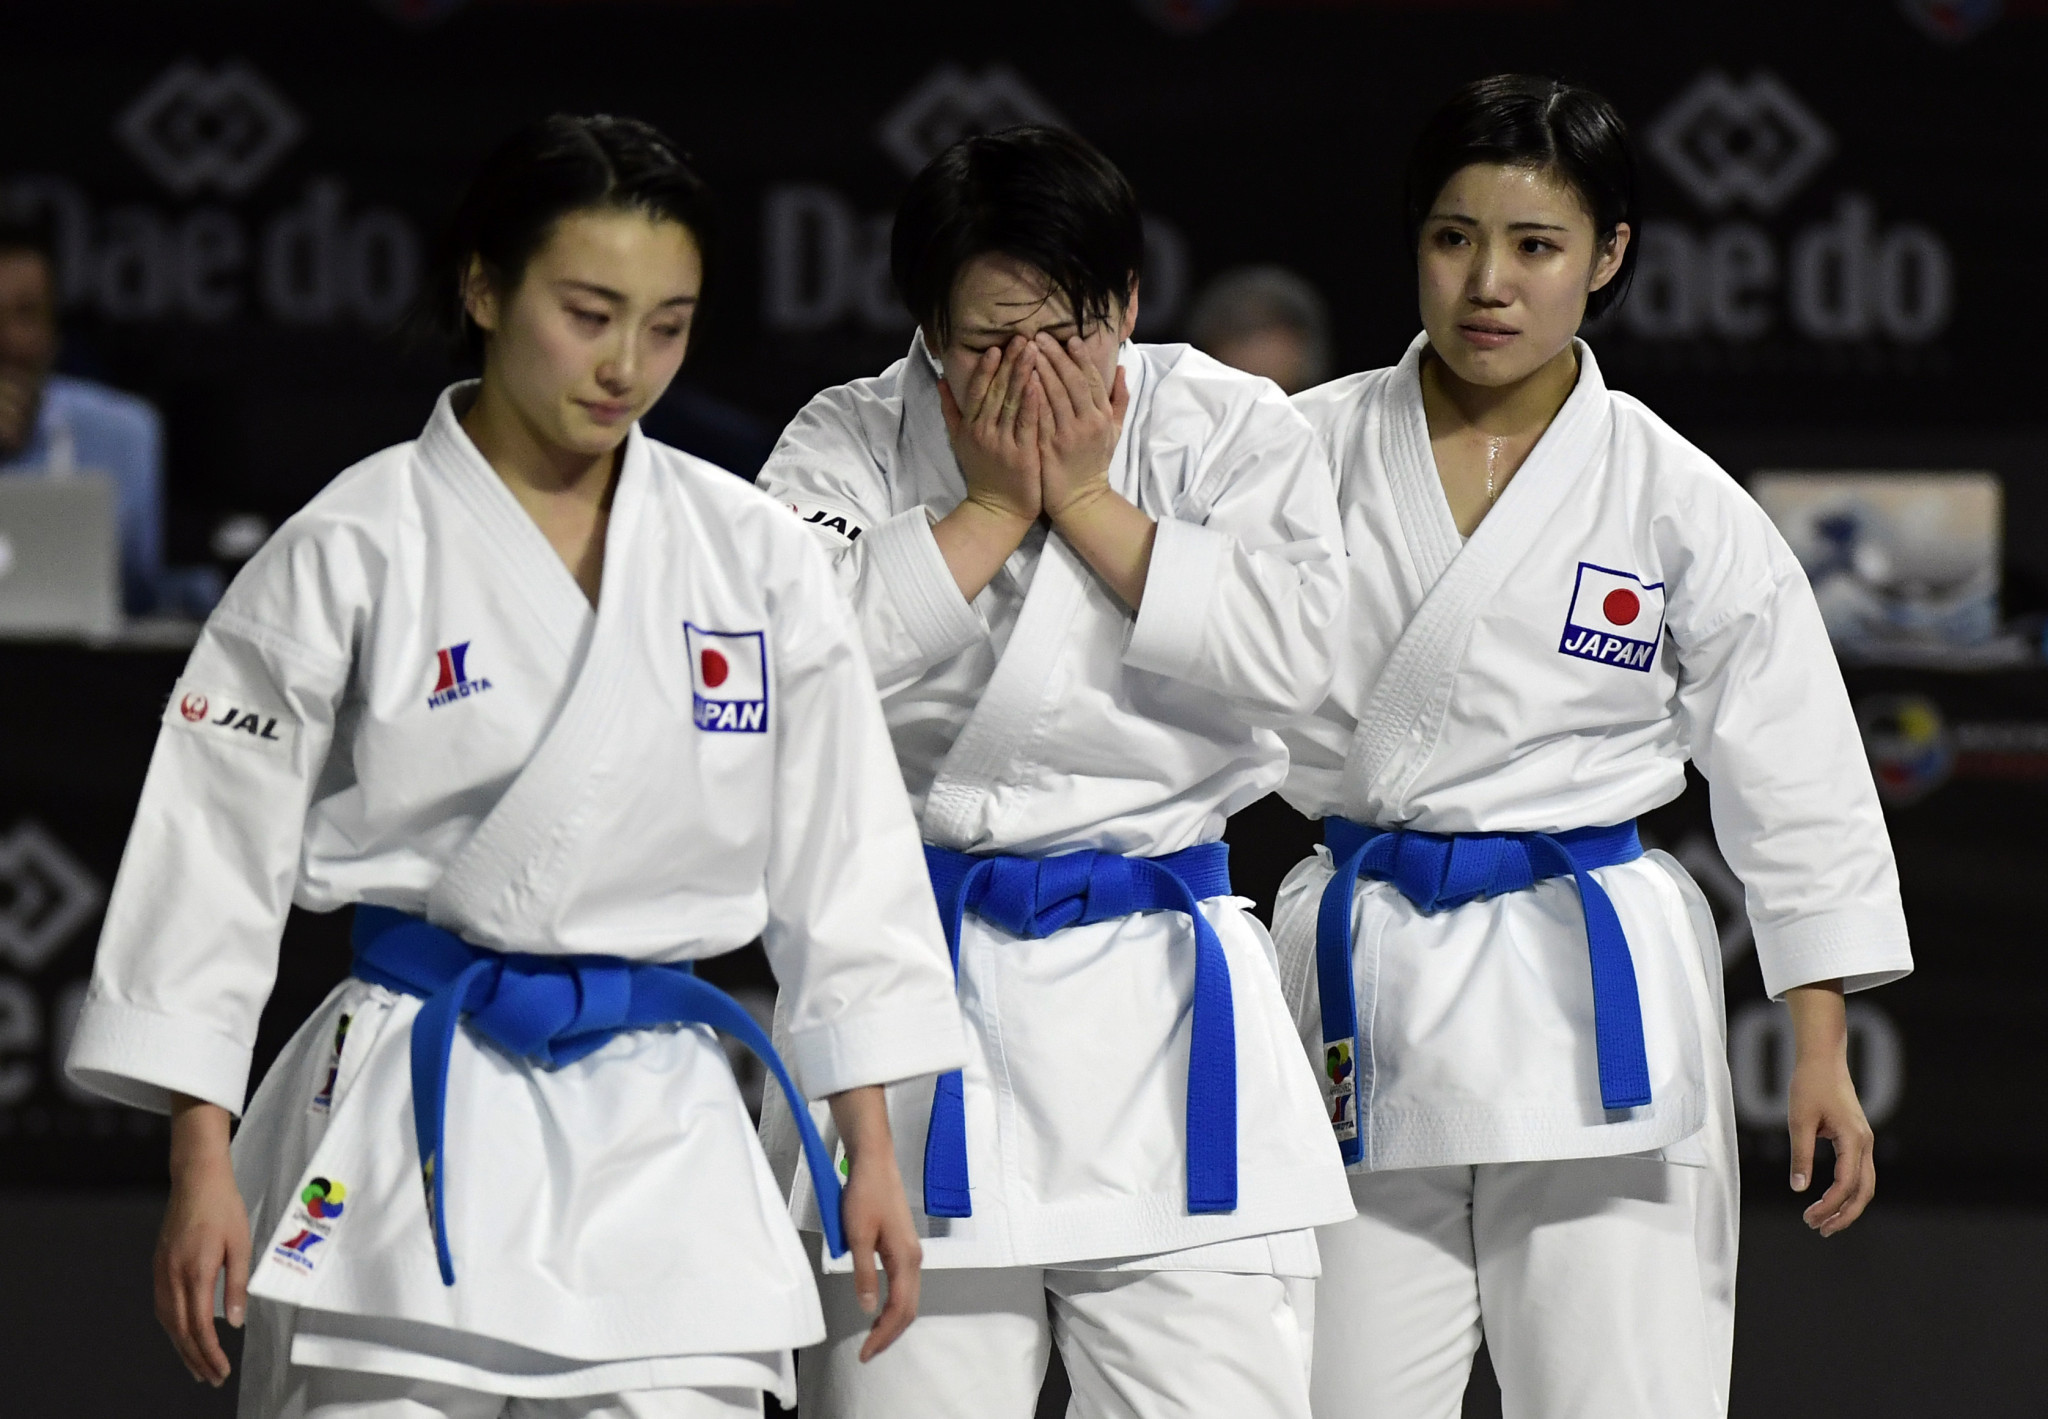 There were tears of joy from the Japanese team after they retained their title ©Getty Images